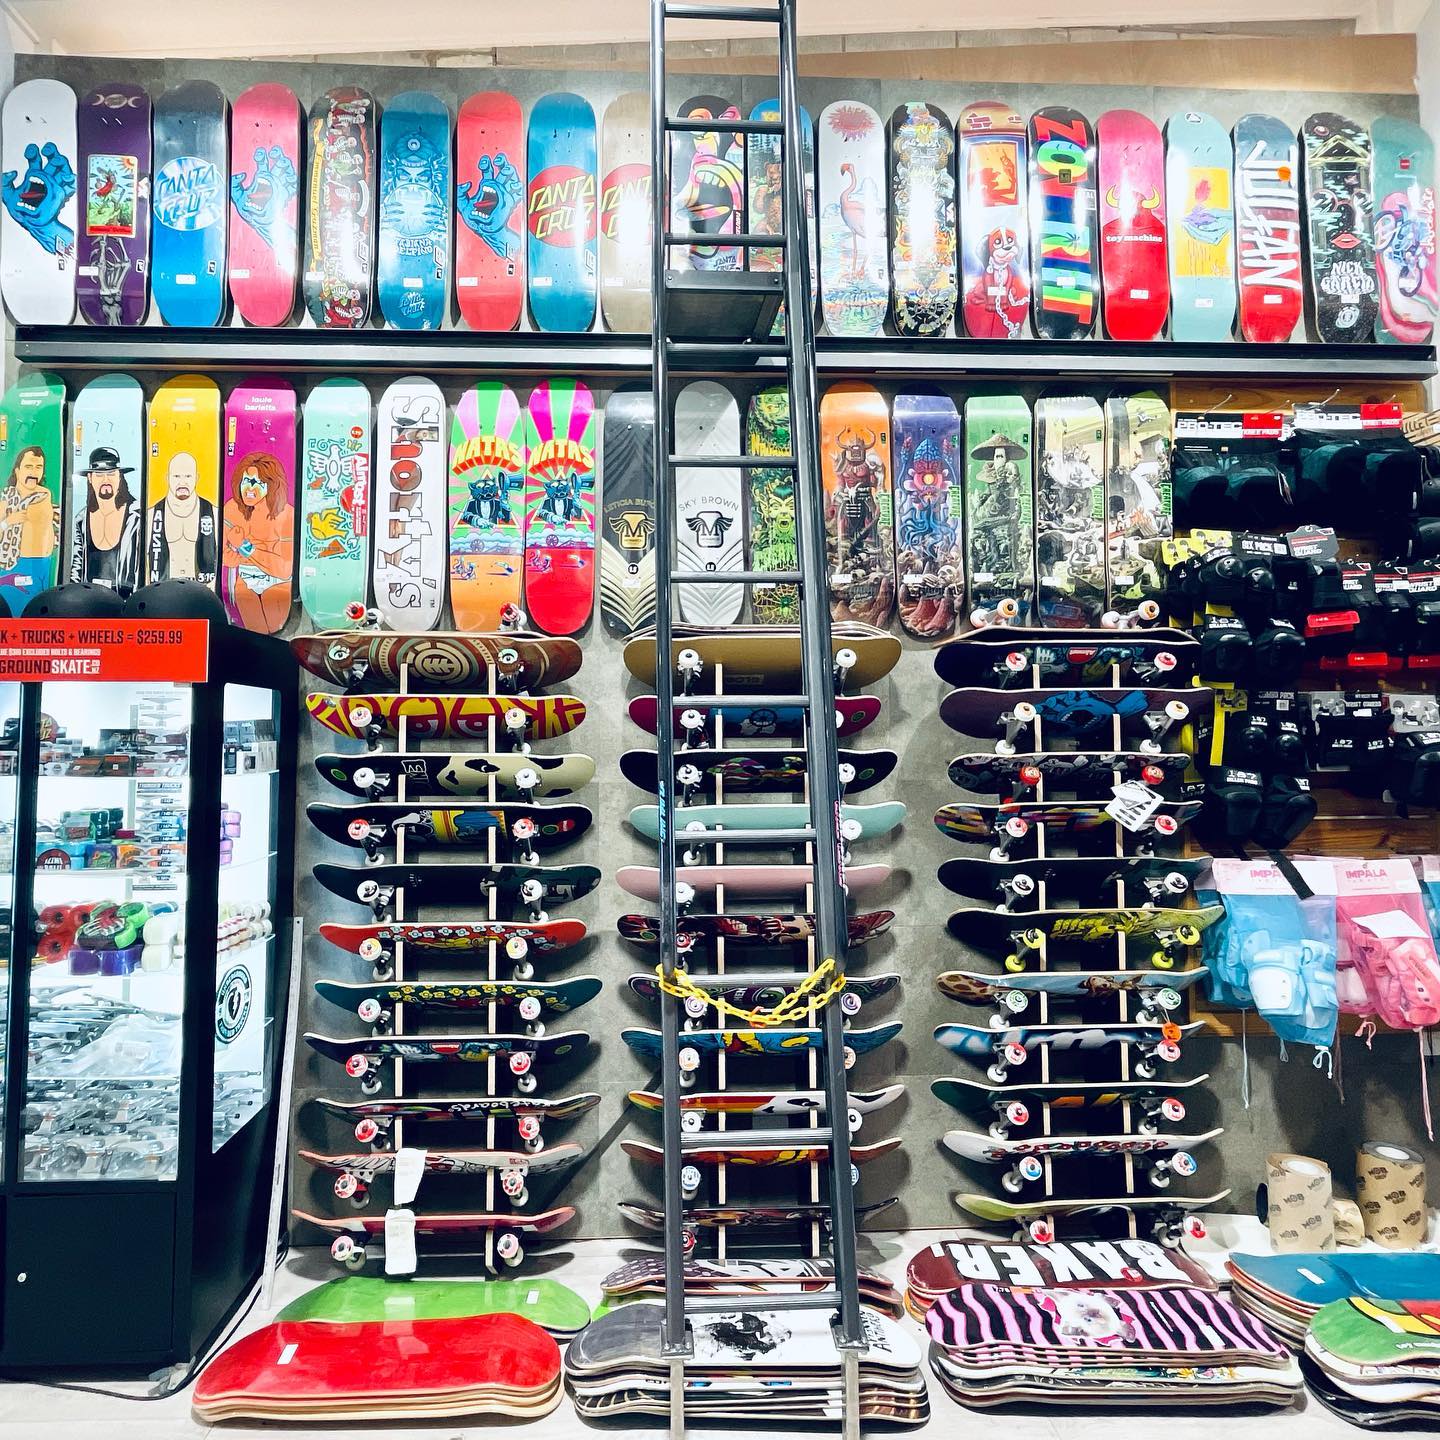 There is no better time to upgrade your board with 15% off all complete skateboards and longboards* until 7th Feb.
 *excludes slide & smoothstar

#skatesale #skatesalenz #skatecomplete #skatenz #nzskateshop #nzskateboarding #orewabeach #thisisus #undergroundskatenz